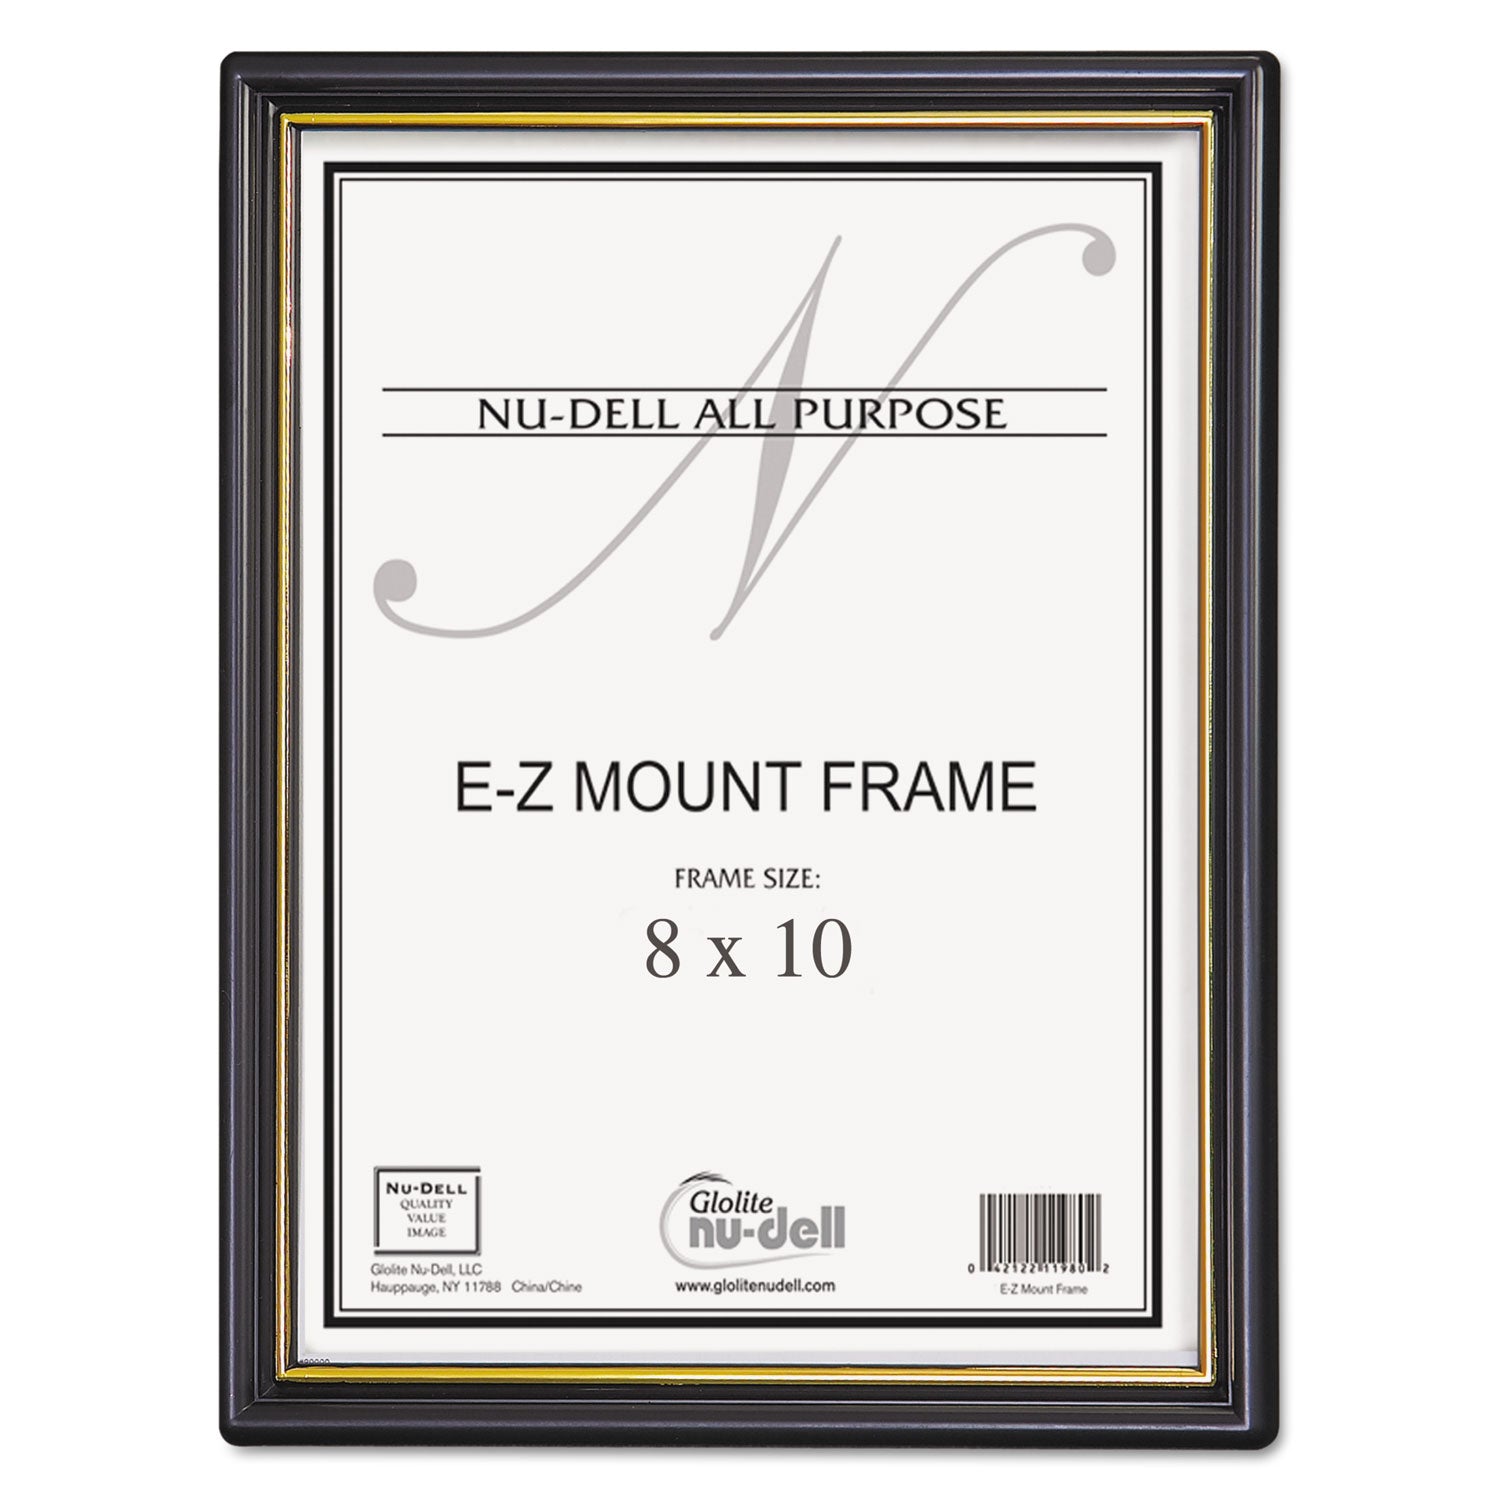 EZ Mount Document Frame with Trim Accent and Plastic Face, Plastic, 8 x 10, Black/Gold - 